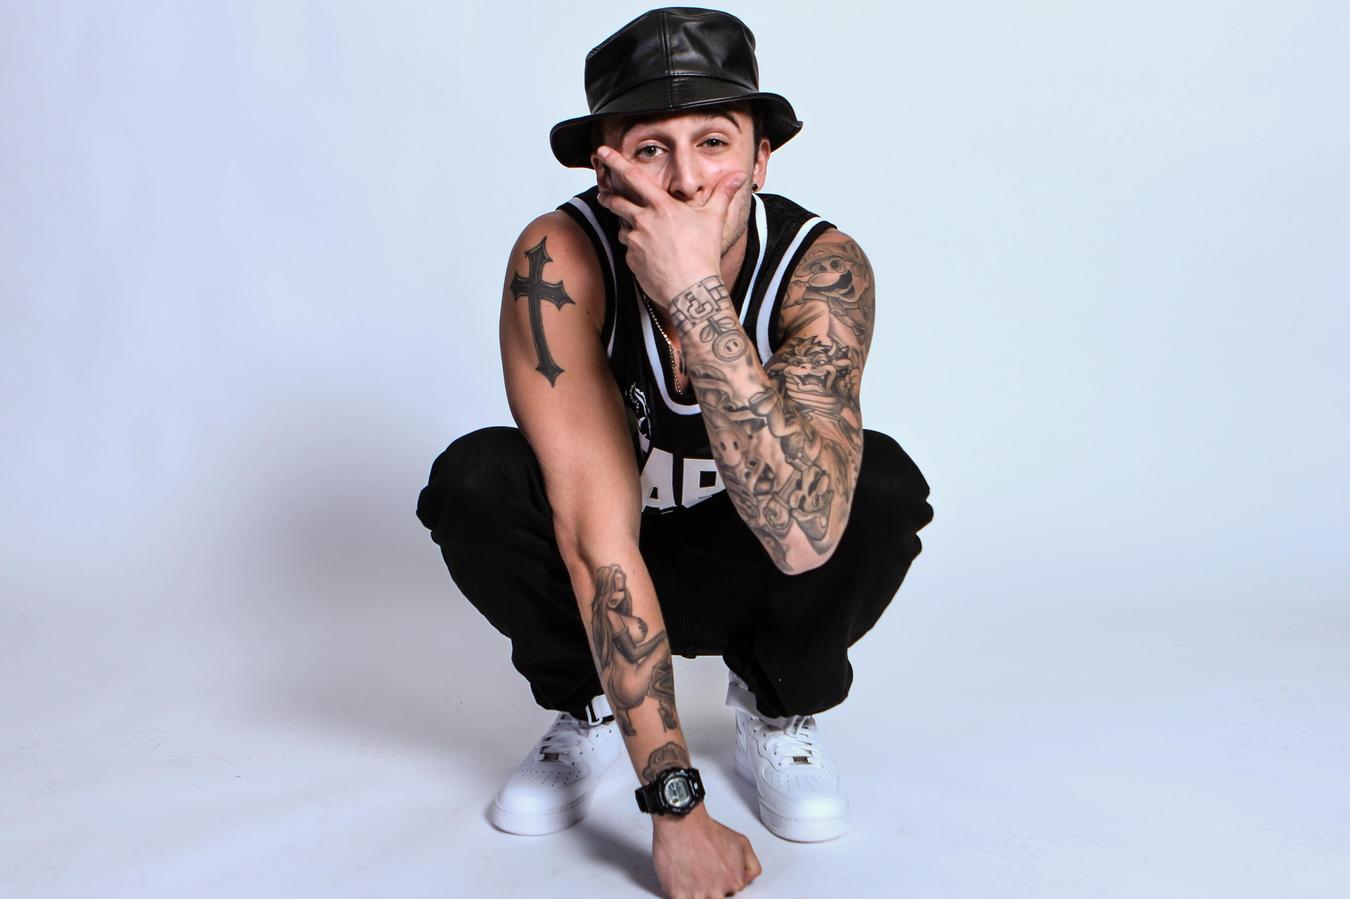 Best 56+ Chris Webby Wallpapers on HipWallpapers.